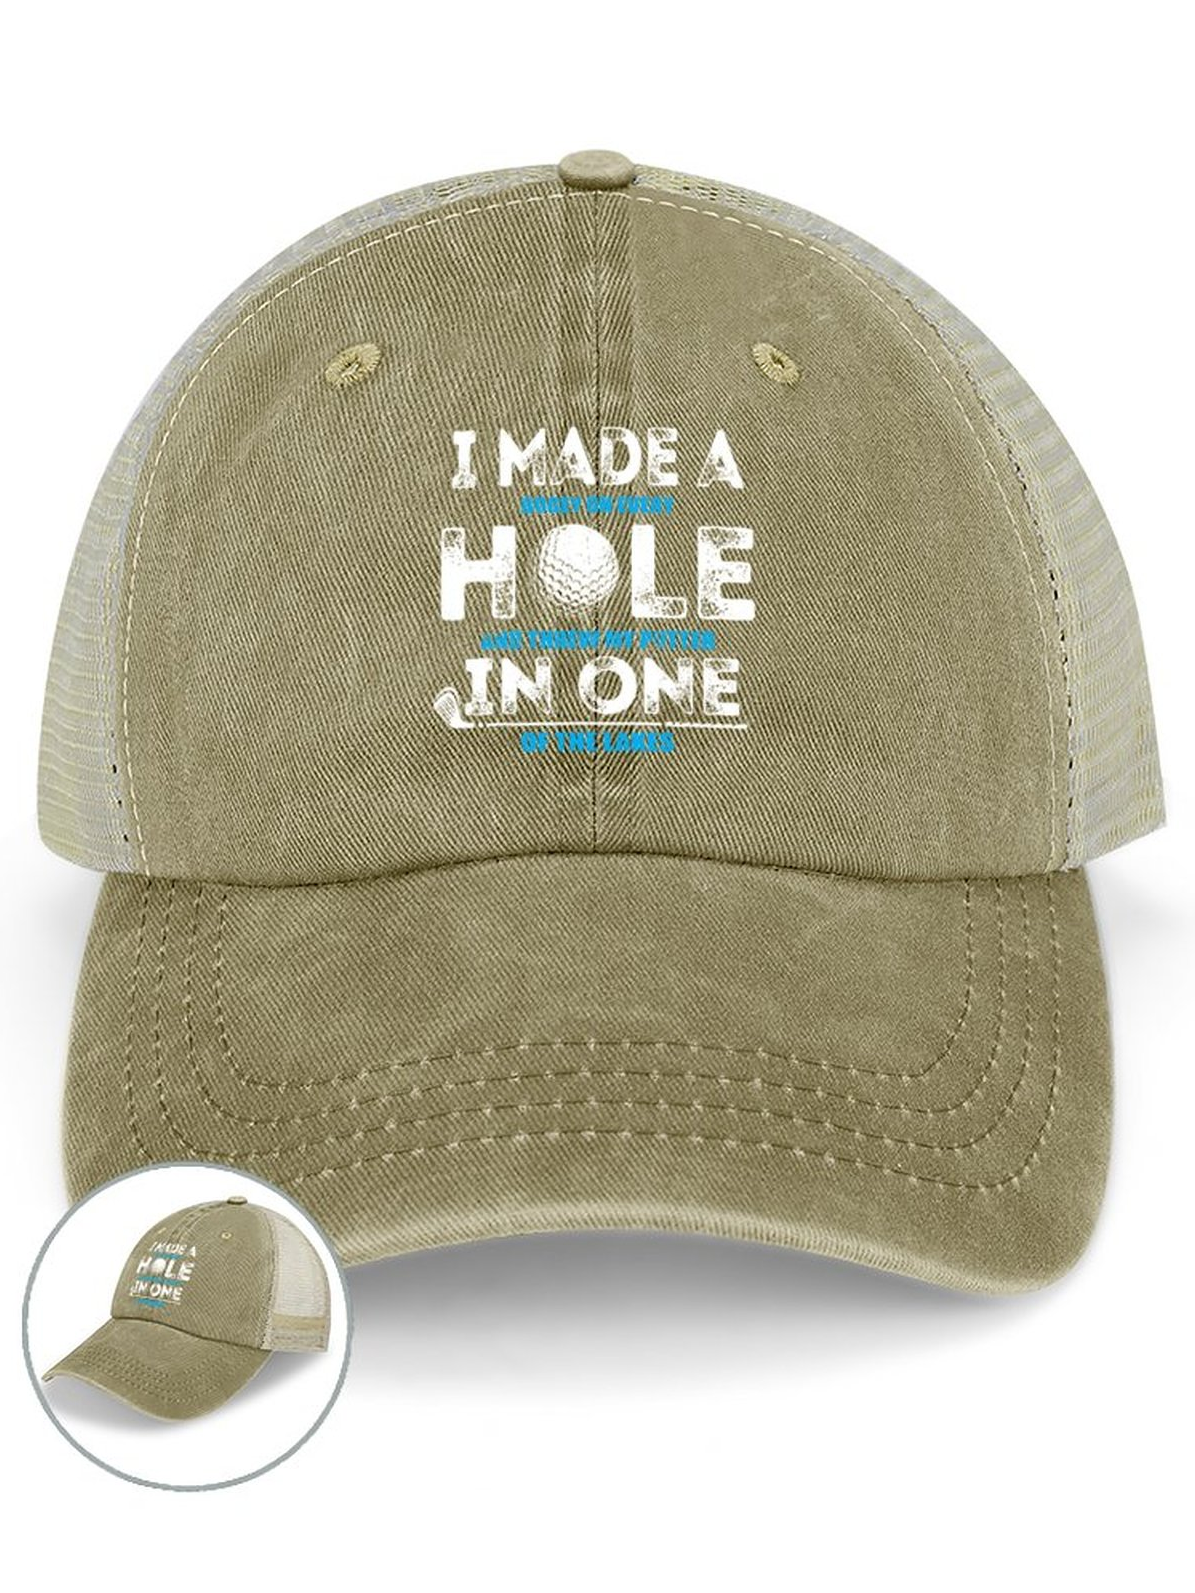 Men’s I Made A Hole In One Golf Crew Neck Regular Fit Casual Text Letters Washed Mesh-back Baseball Cap